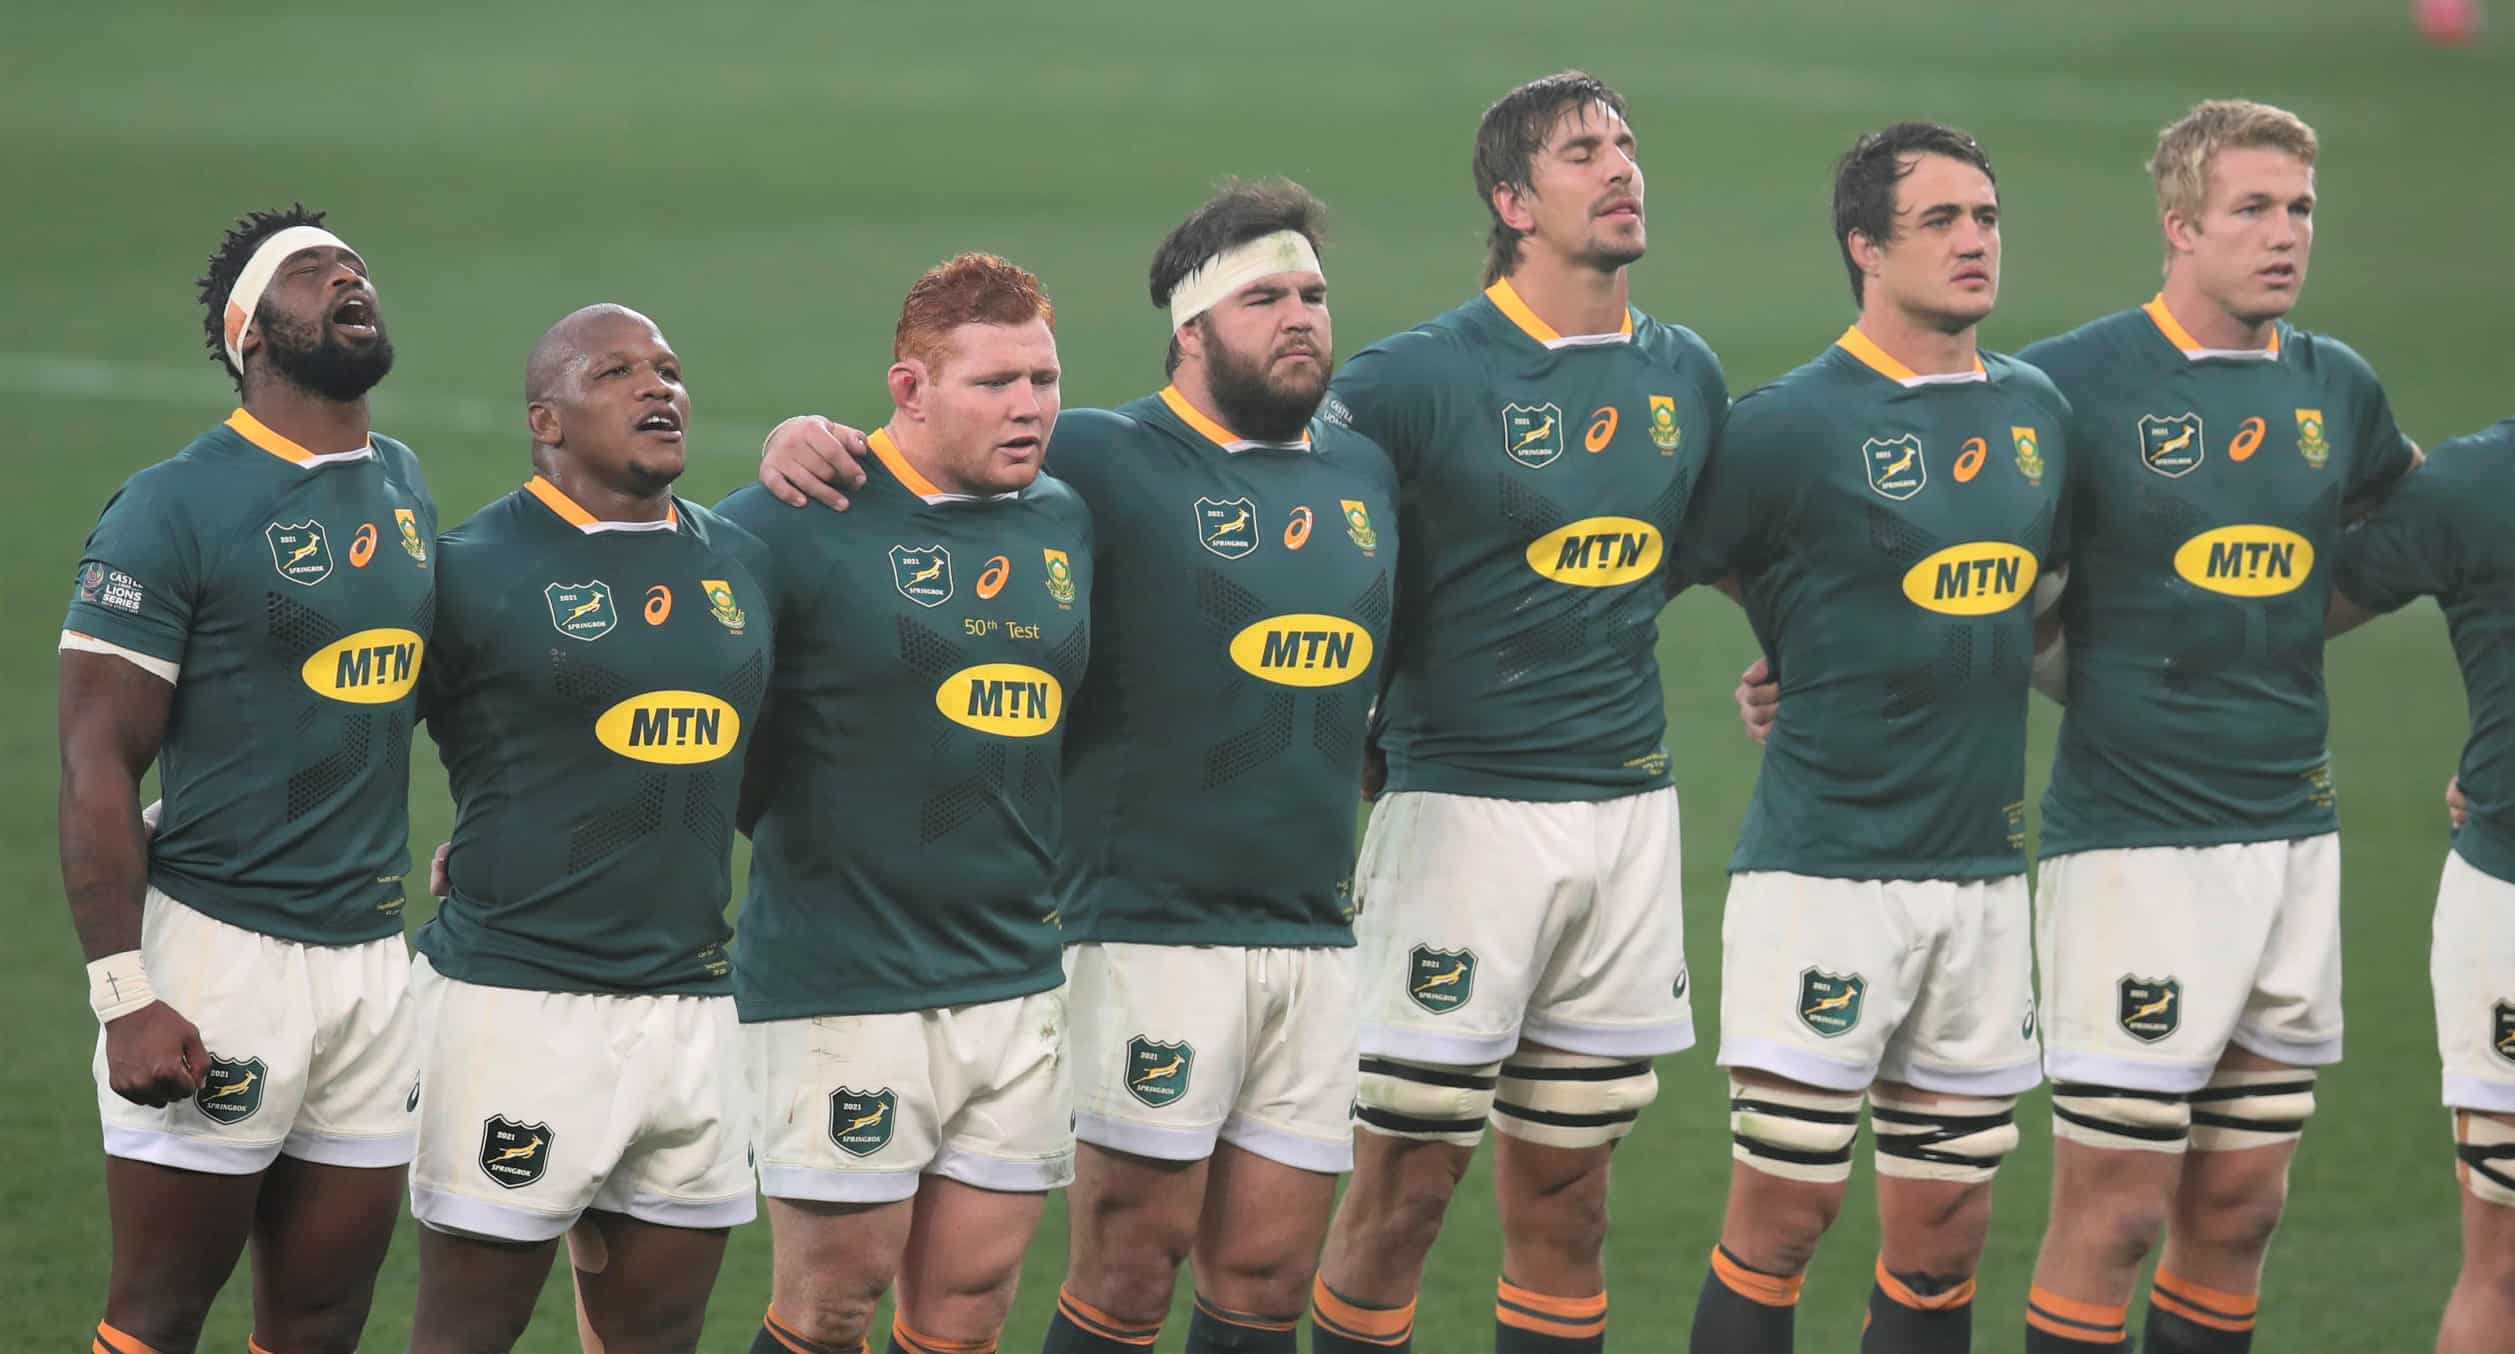 You are currently viewing Springboks offer hope to traumatised nation, says skipper Kolisi